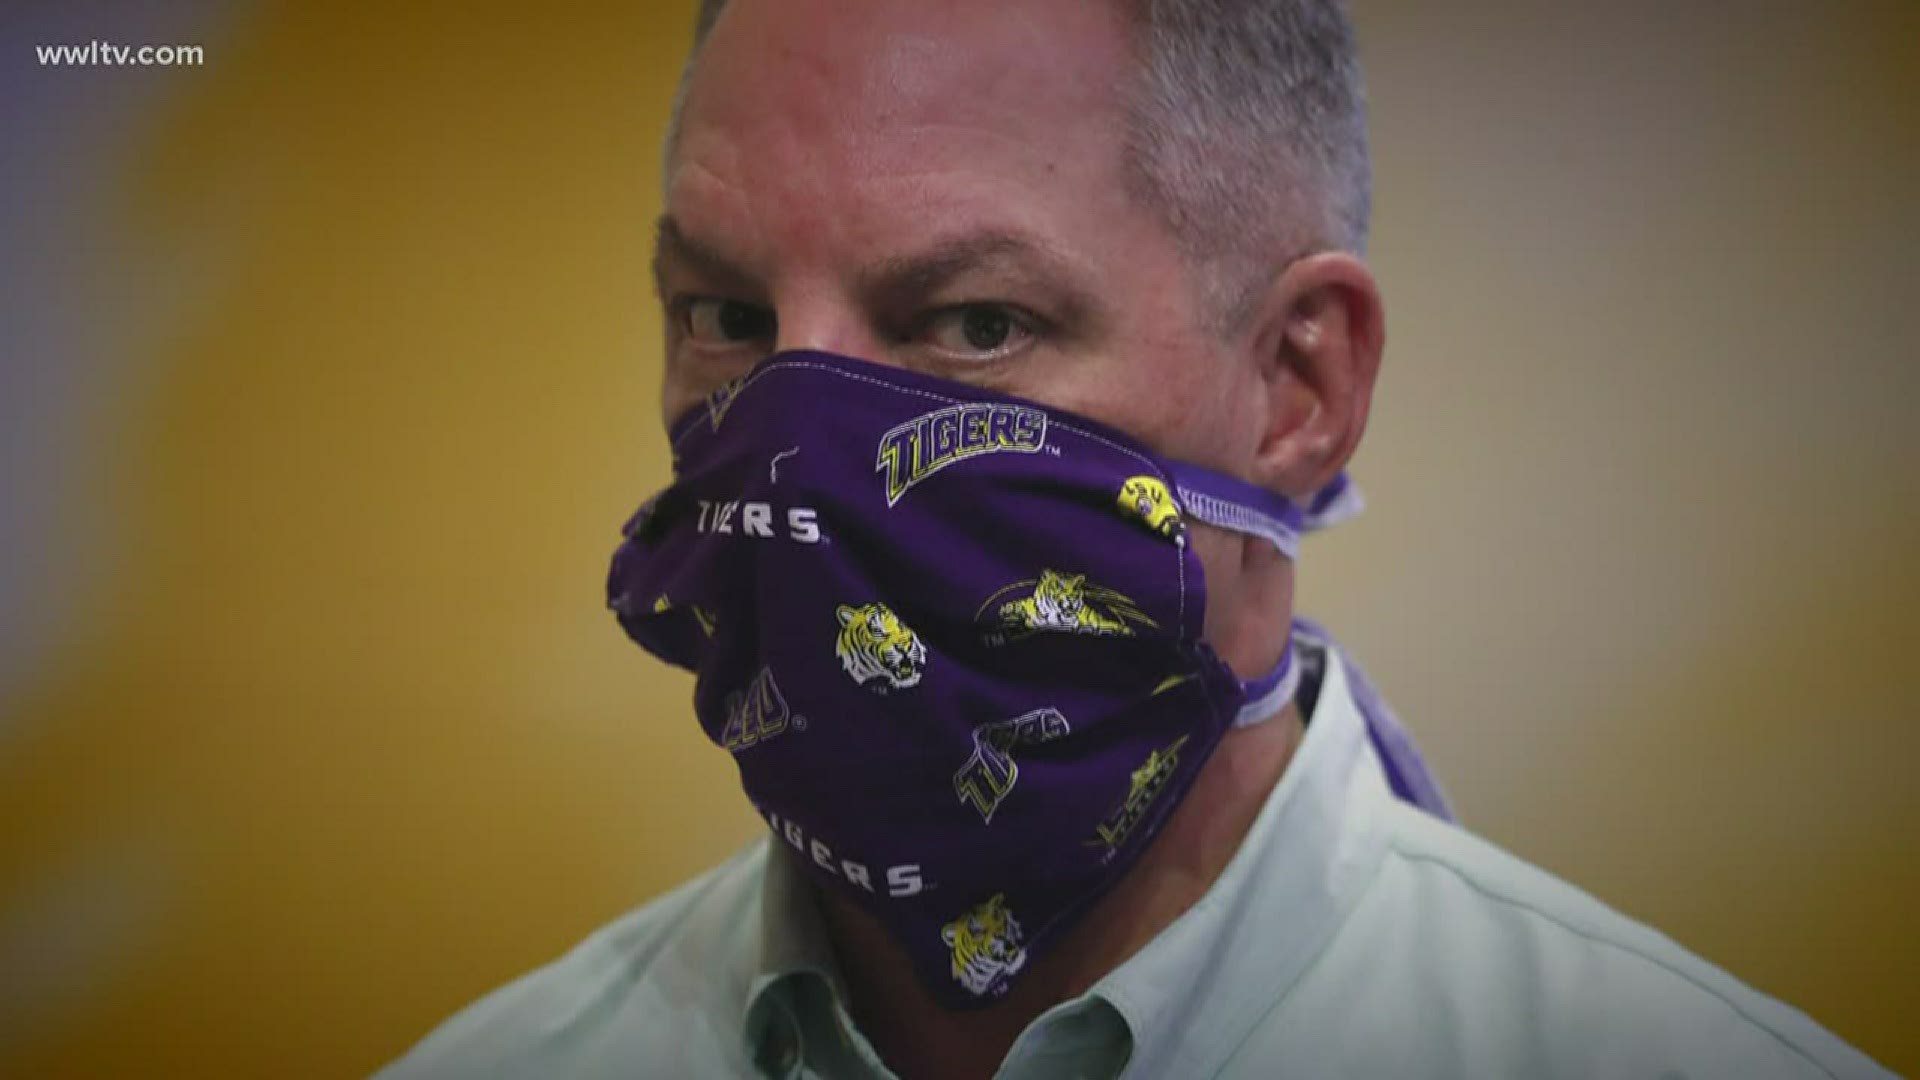 Governor John Bel Edwards says that wearing a mask is being polite like opening a door for someone, showing that you have consideration for them.